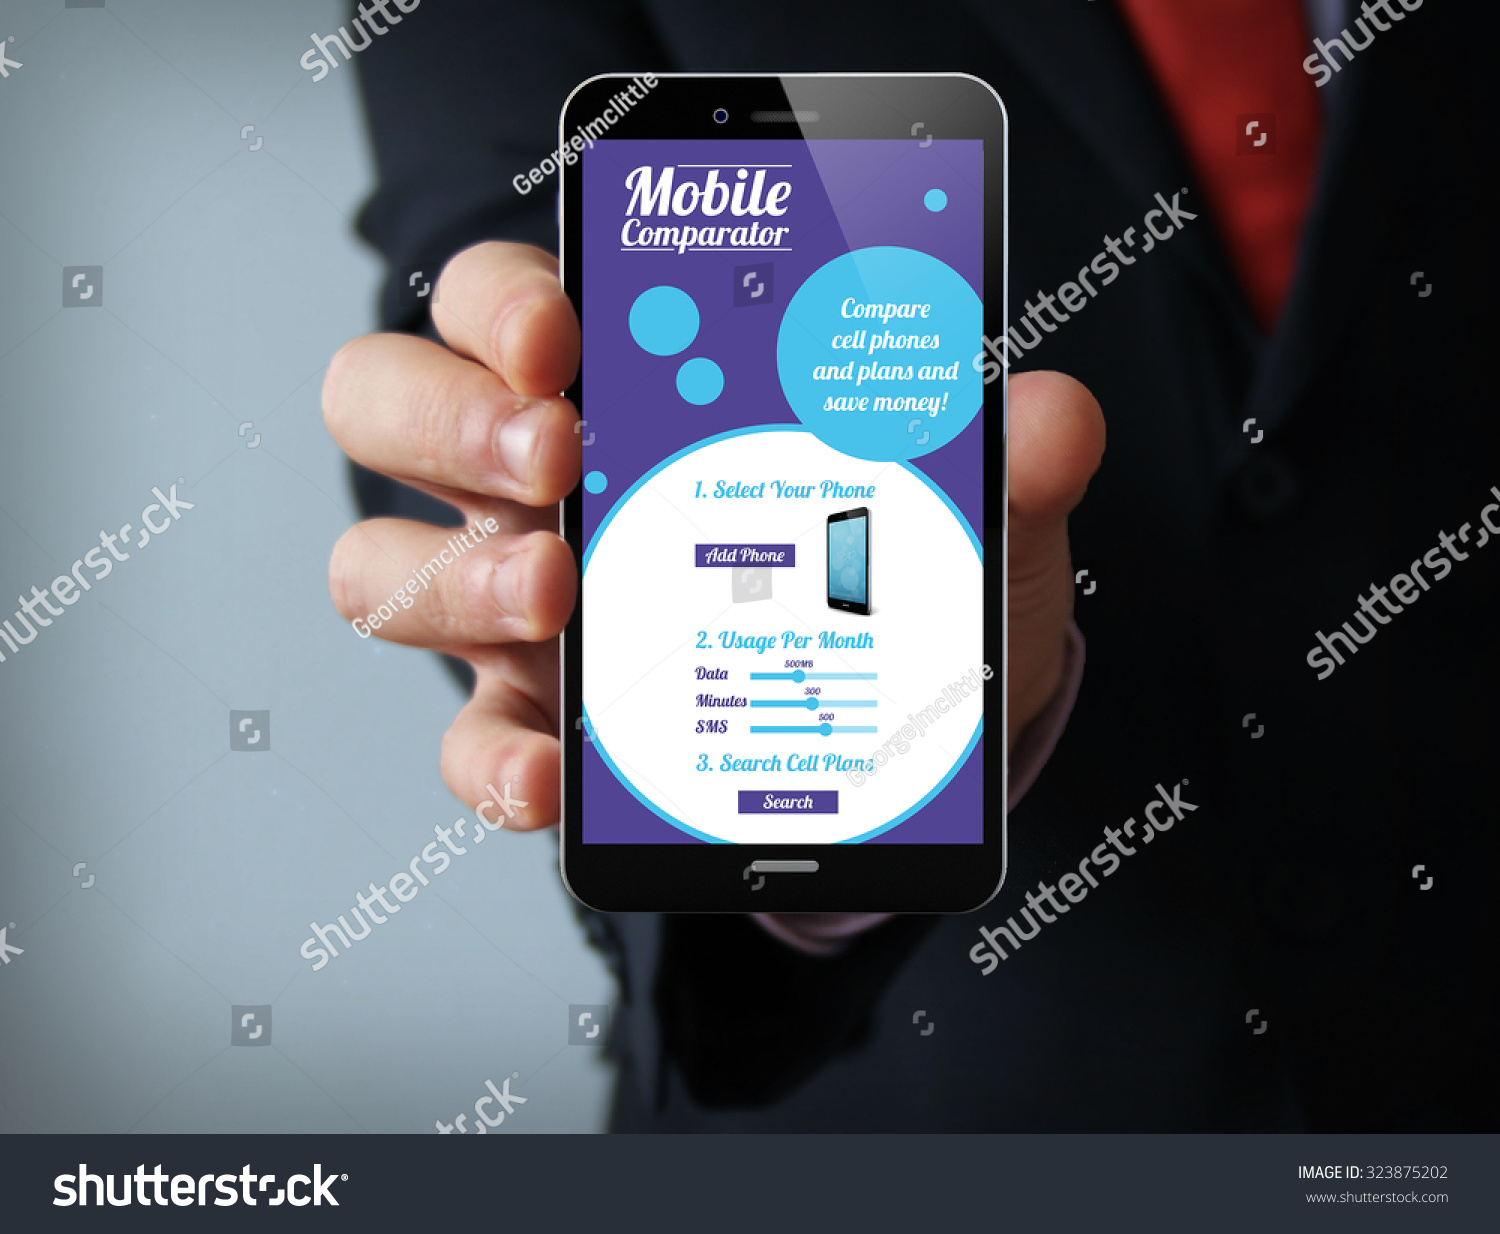 new technologies business concept: businessman hand holding a 3d generated touch phone with online mobile comparator on the screen. Screen graphics are made up. #323875202